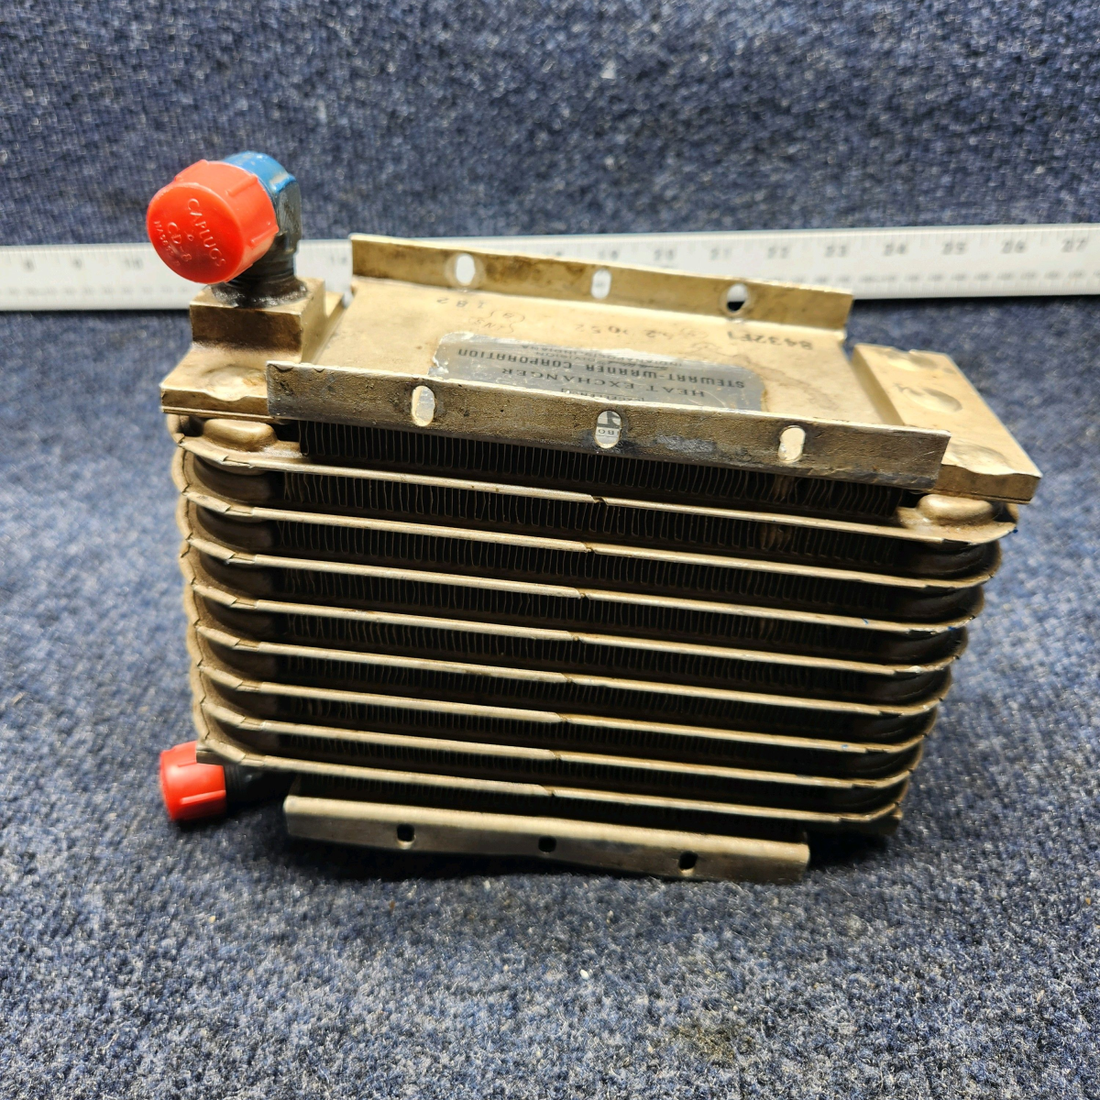 Used aircraft parts for sale, 8432L Lycoming Textron OIL COOLER ASSEMBLY "SEE PHOTOS"